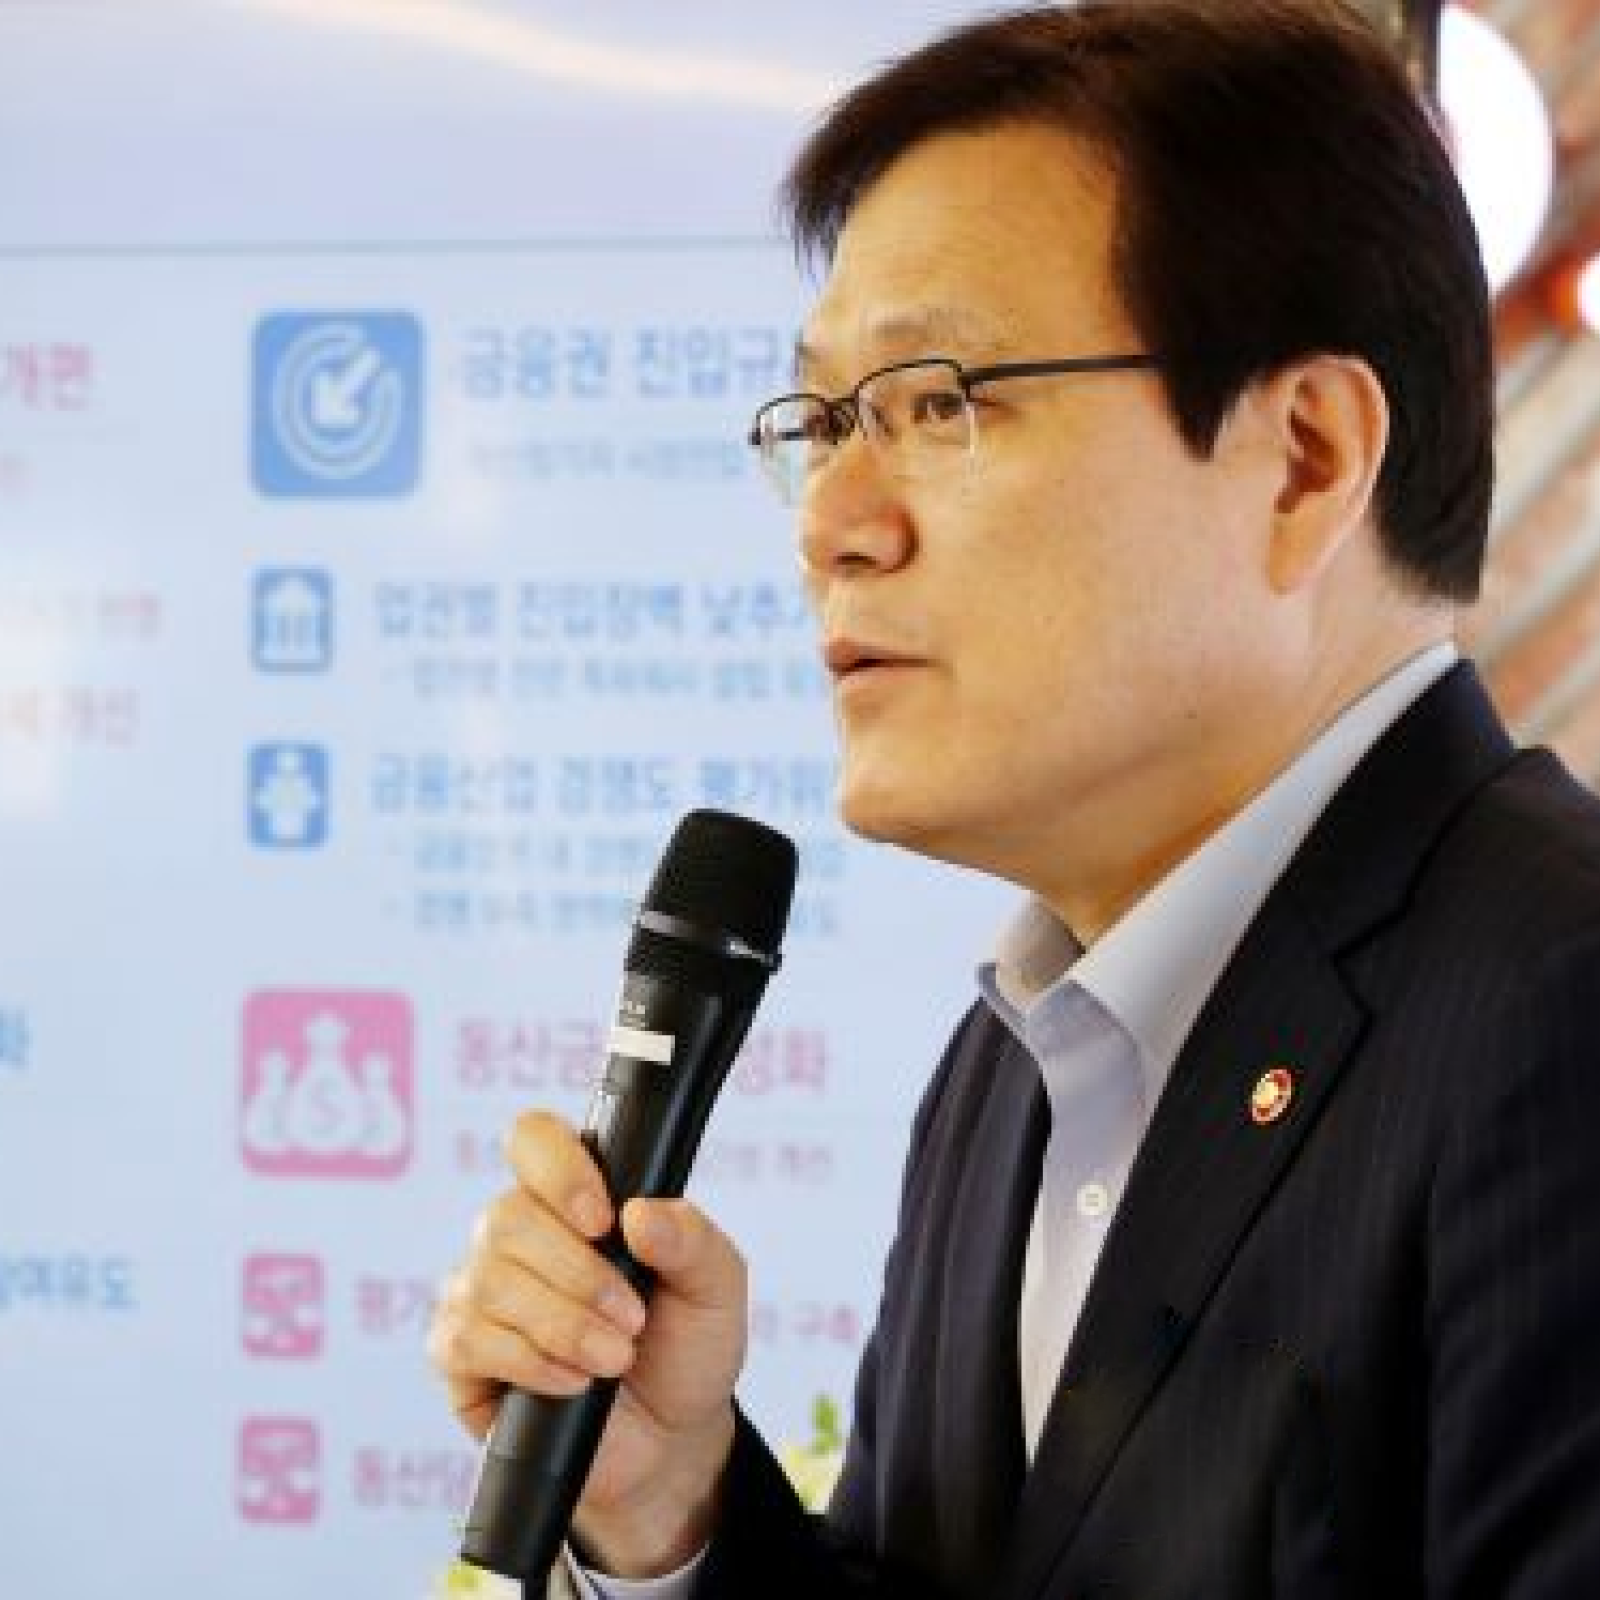 Korean Government Clarifies Position After Supreme Court Crypto Ruling